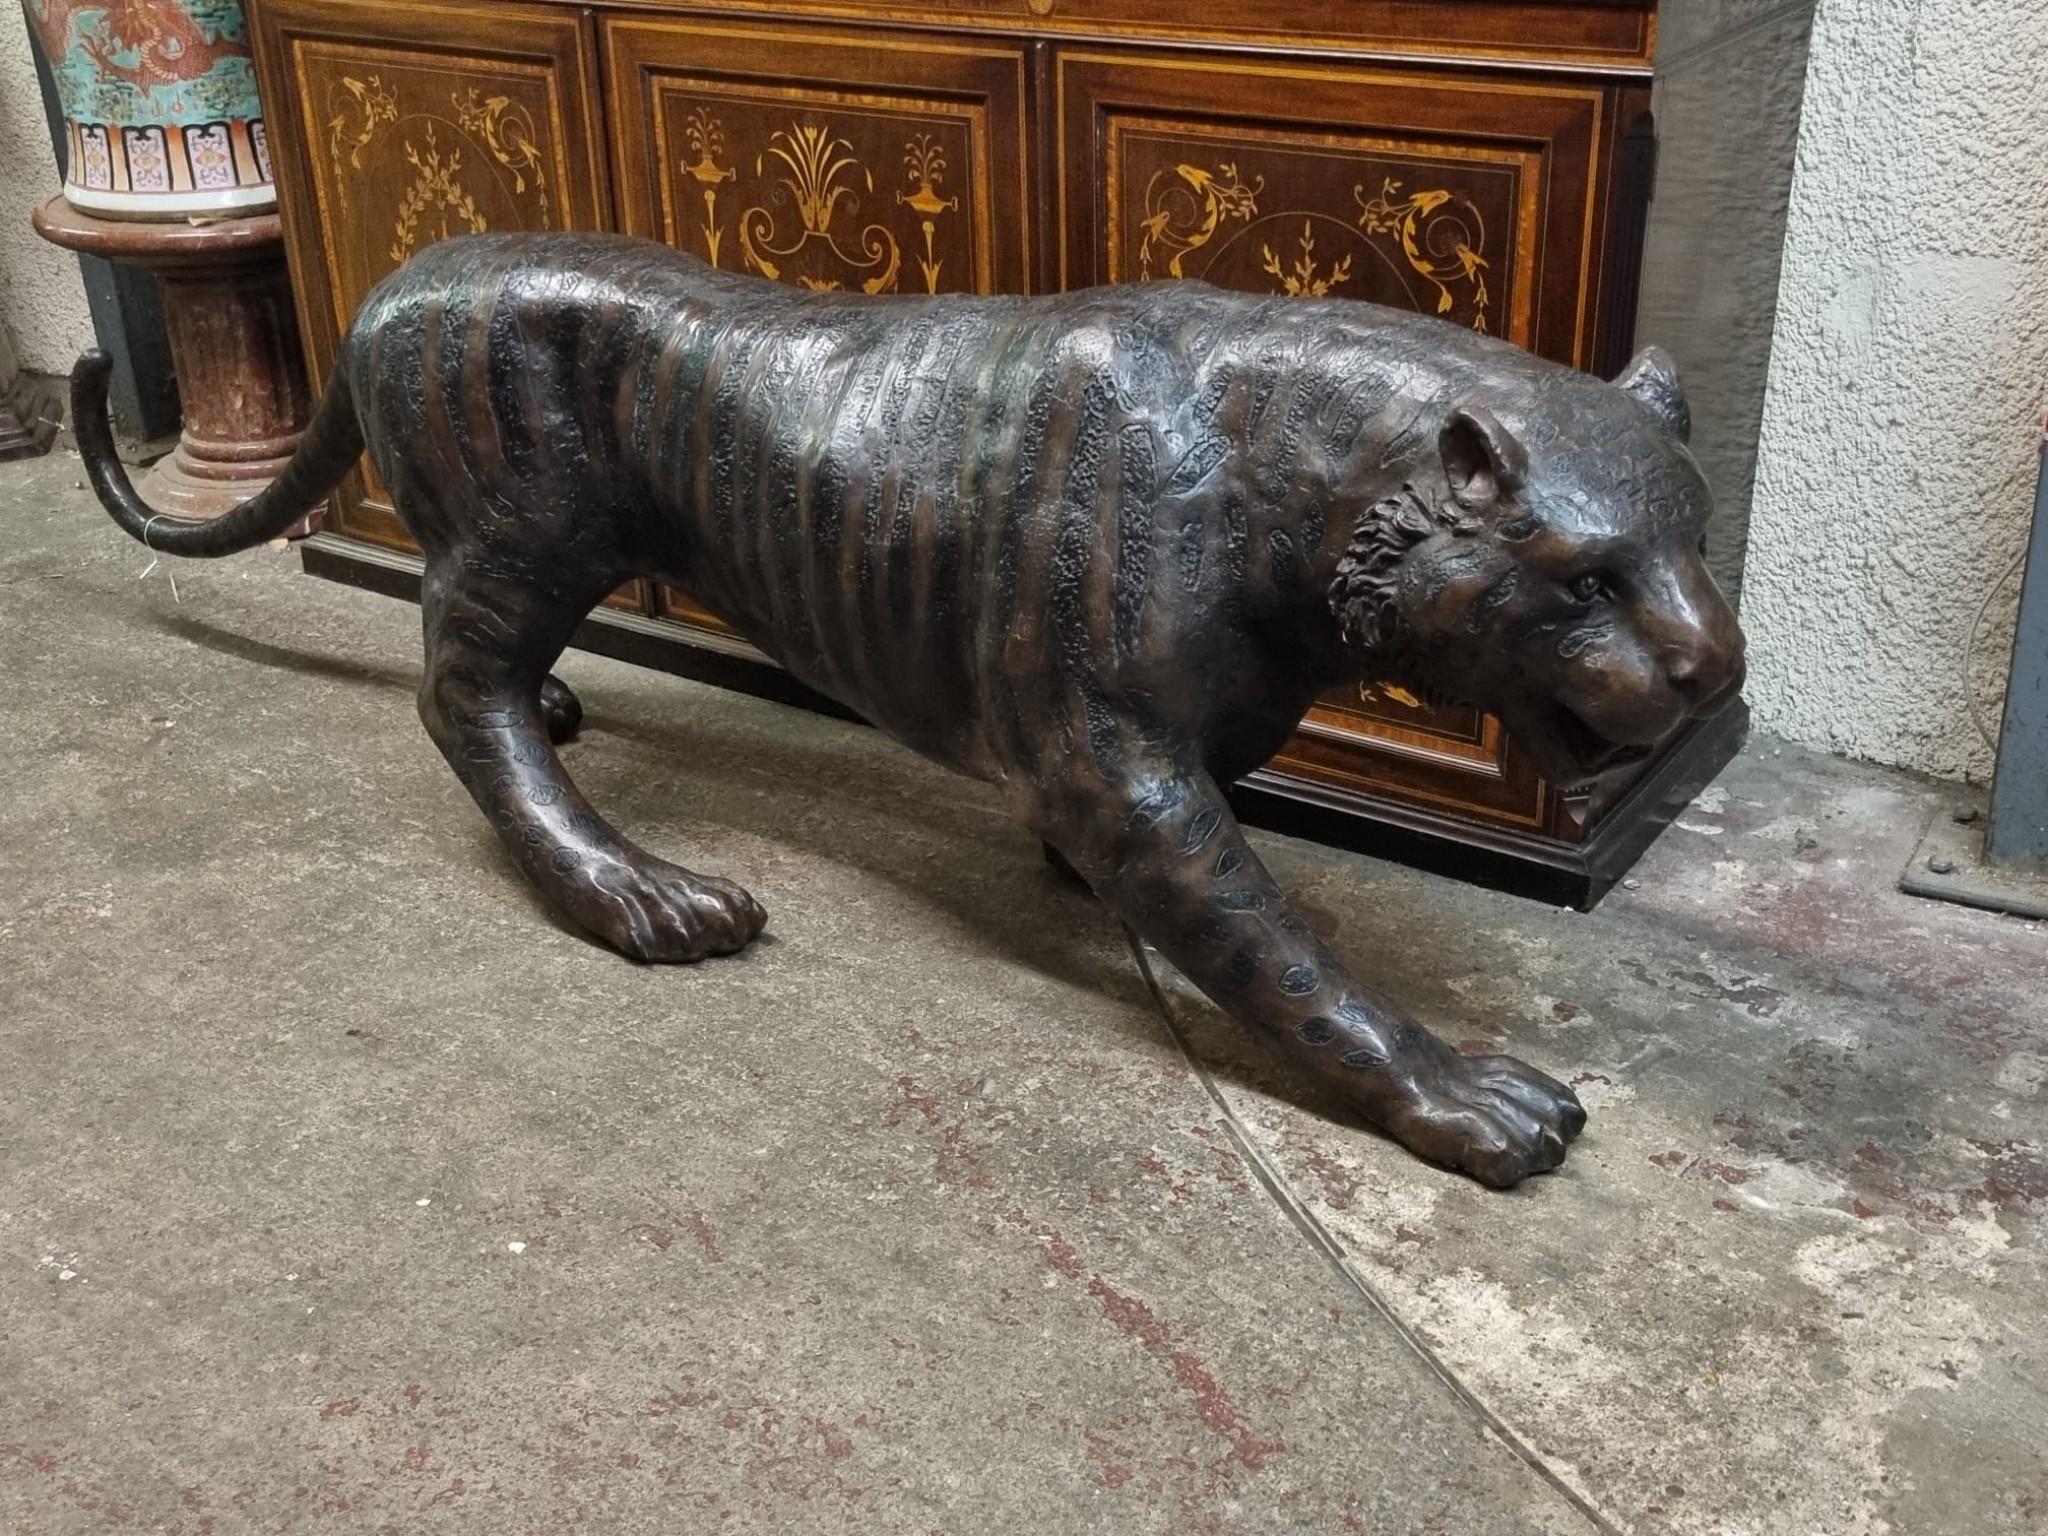 Wonderful bronze casting of a tiger cat
At over two mentres from head to tail this is almost lifesize
Let's put it this way, you wouldn't want to bump into this down a jungle pathway
Love the way the creatures stripes have been rendered as part of